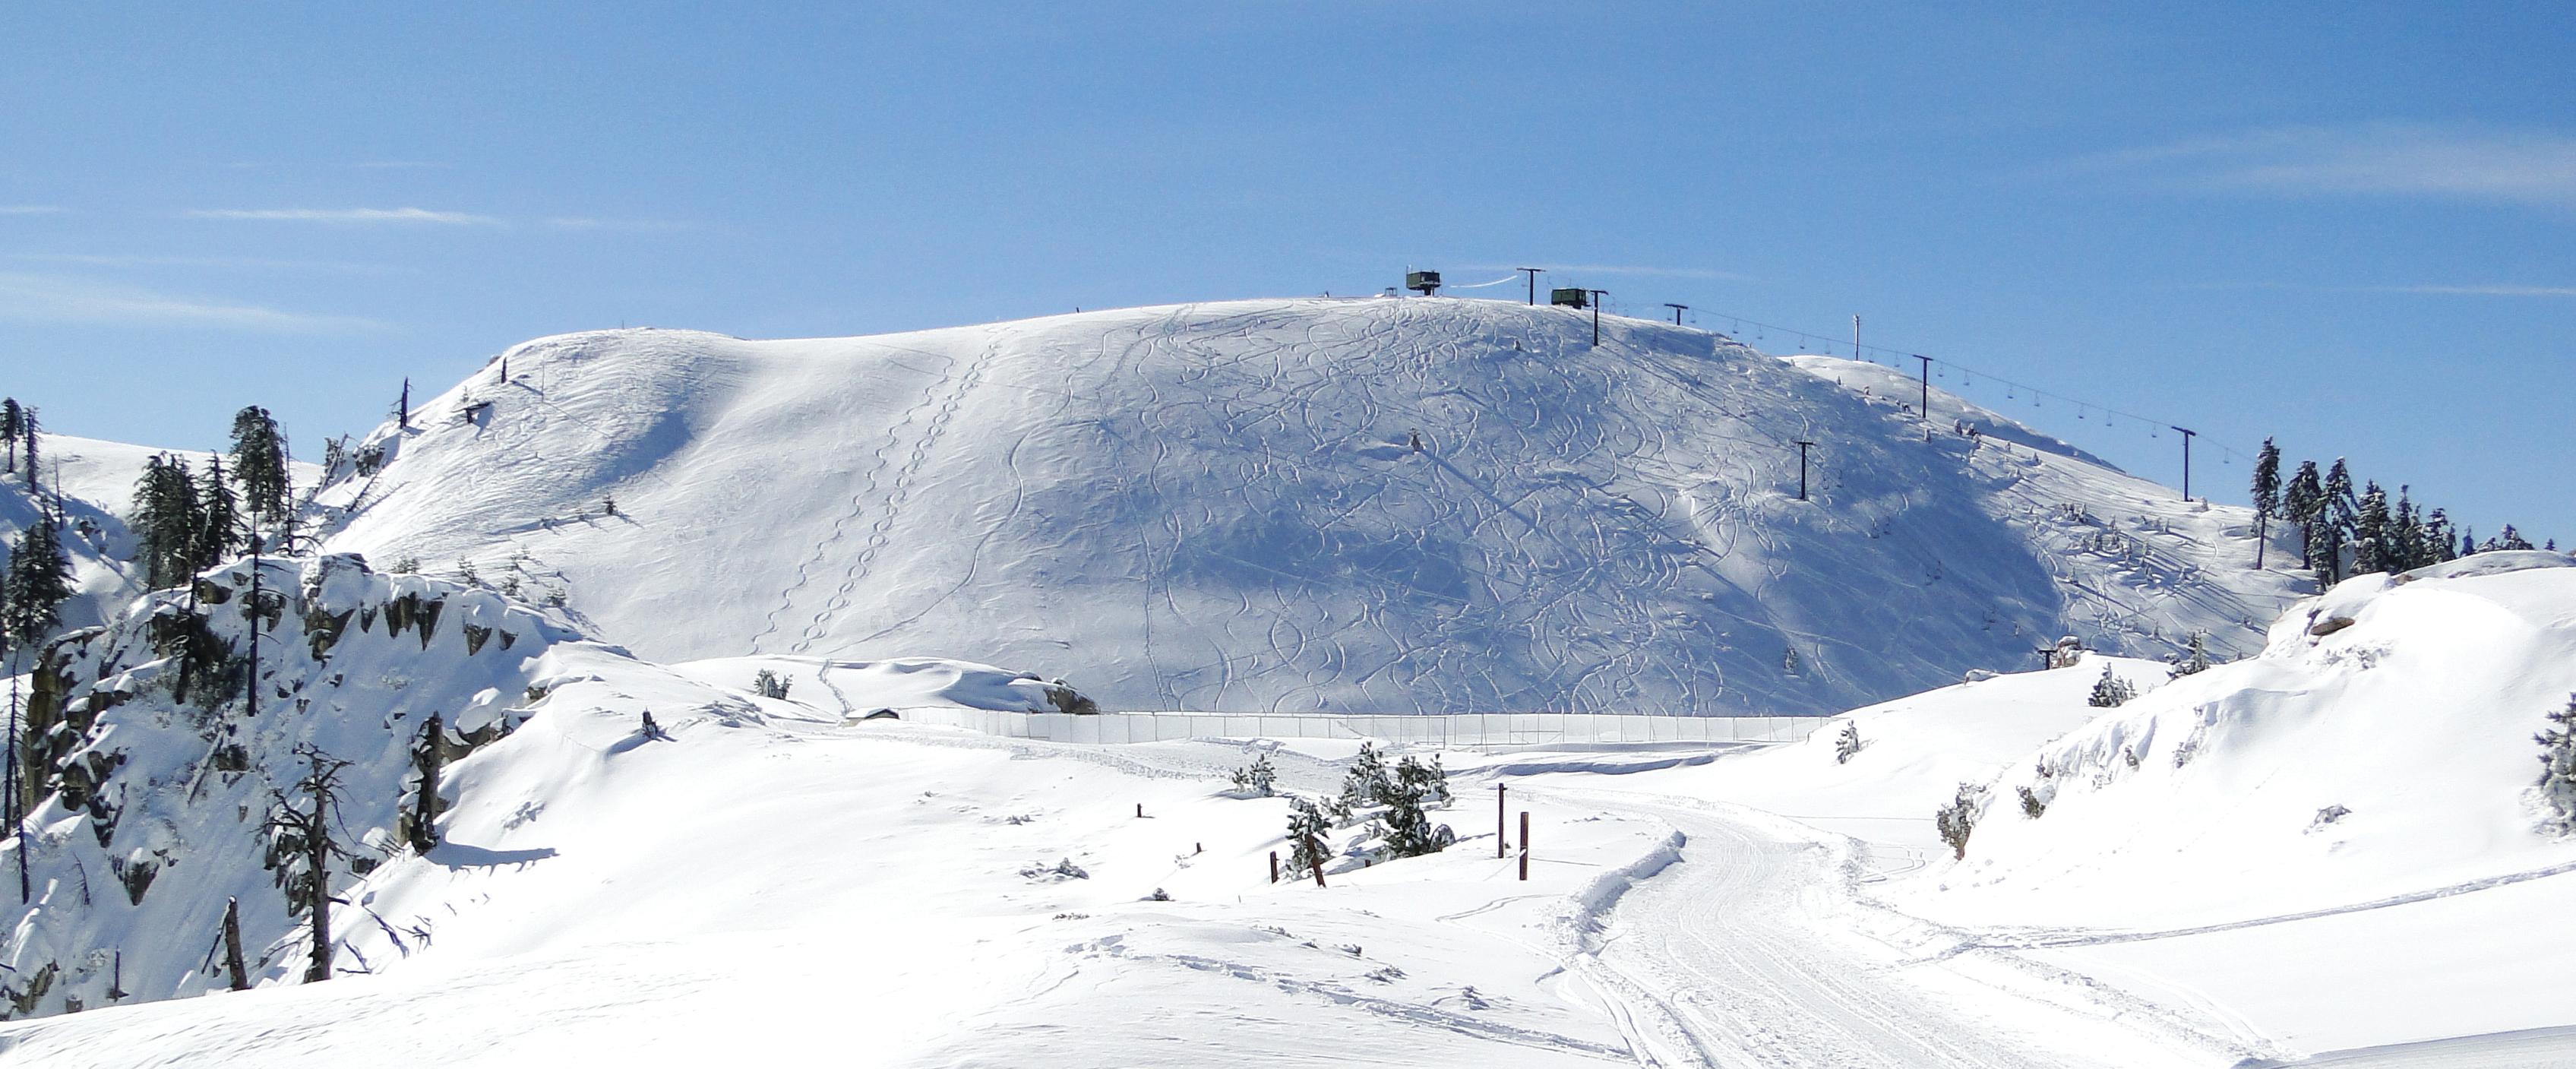 View of a snow-covered ski hill